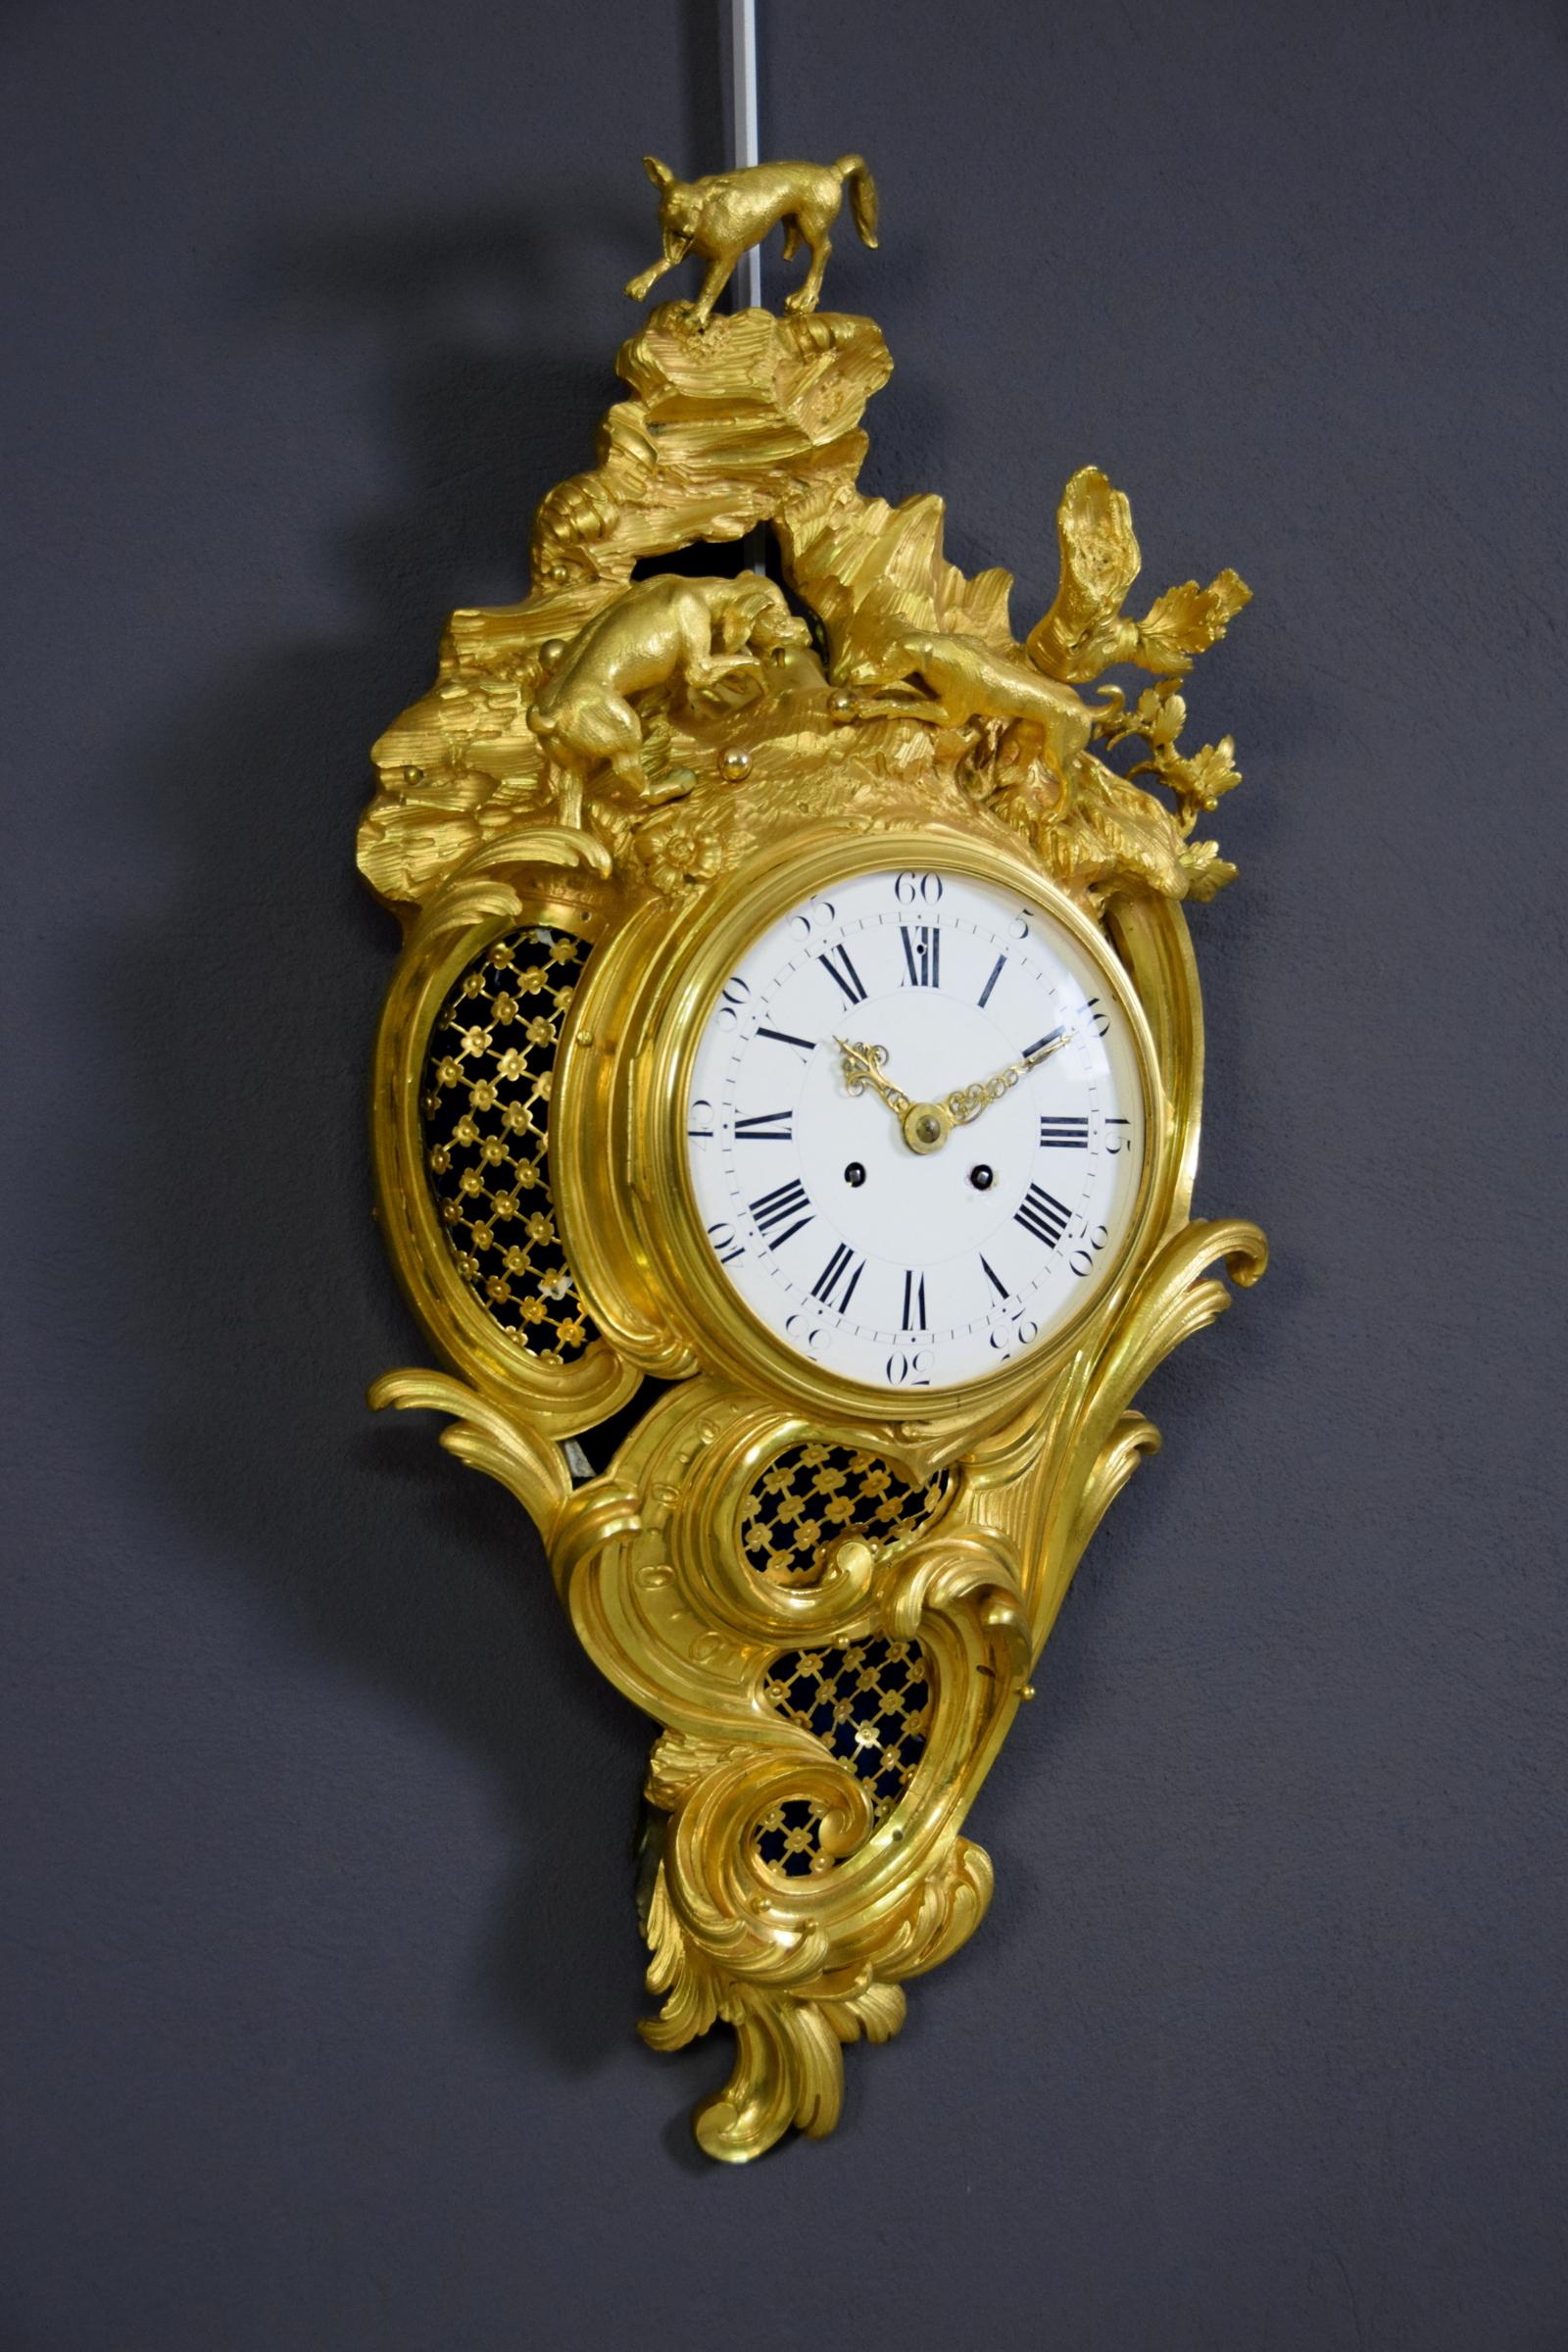 19th century French gilt bronze cartel clock
France, mid-19th century

The cartel clock, in chiseled and gilt bronze, with matt and glossy finish, was made in France in the mid-19th century. With the name cartels are defined those clocks,